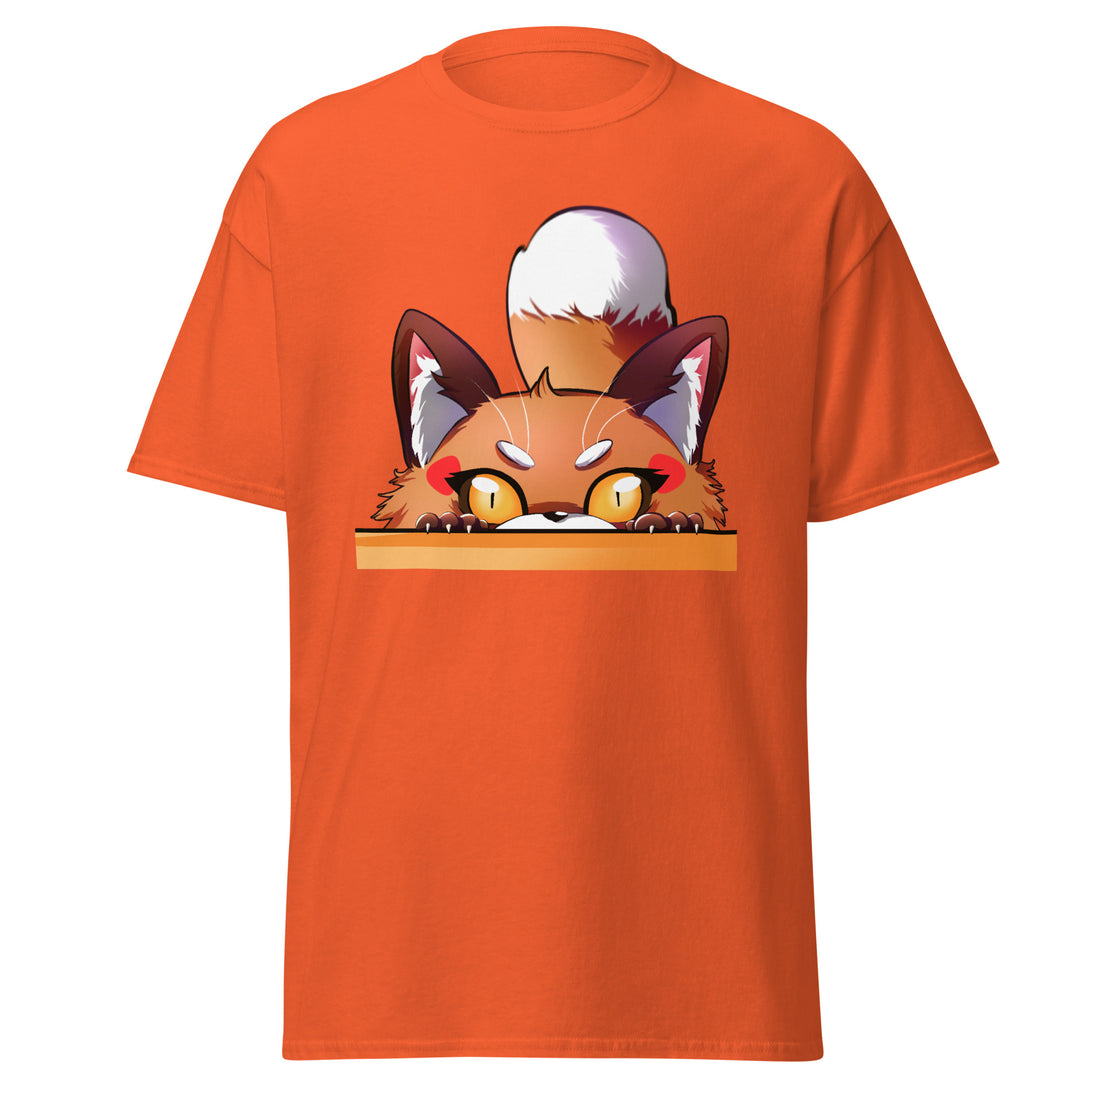 Kawaii Fox Lurk T-Shirt - Soft, Comfy, and Perfect for Gamers and Streamers